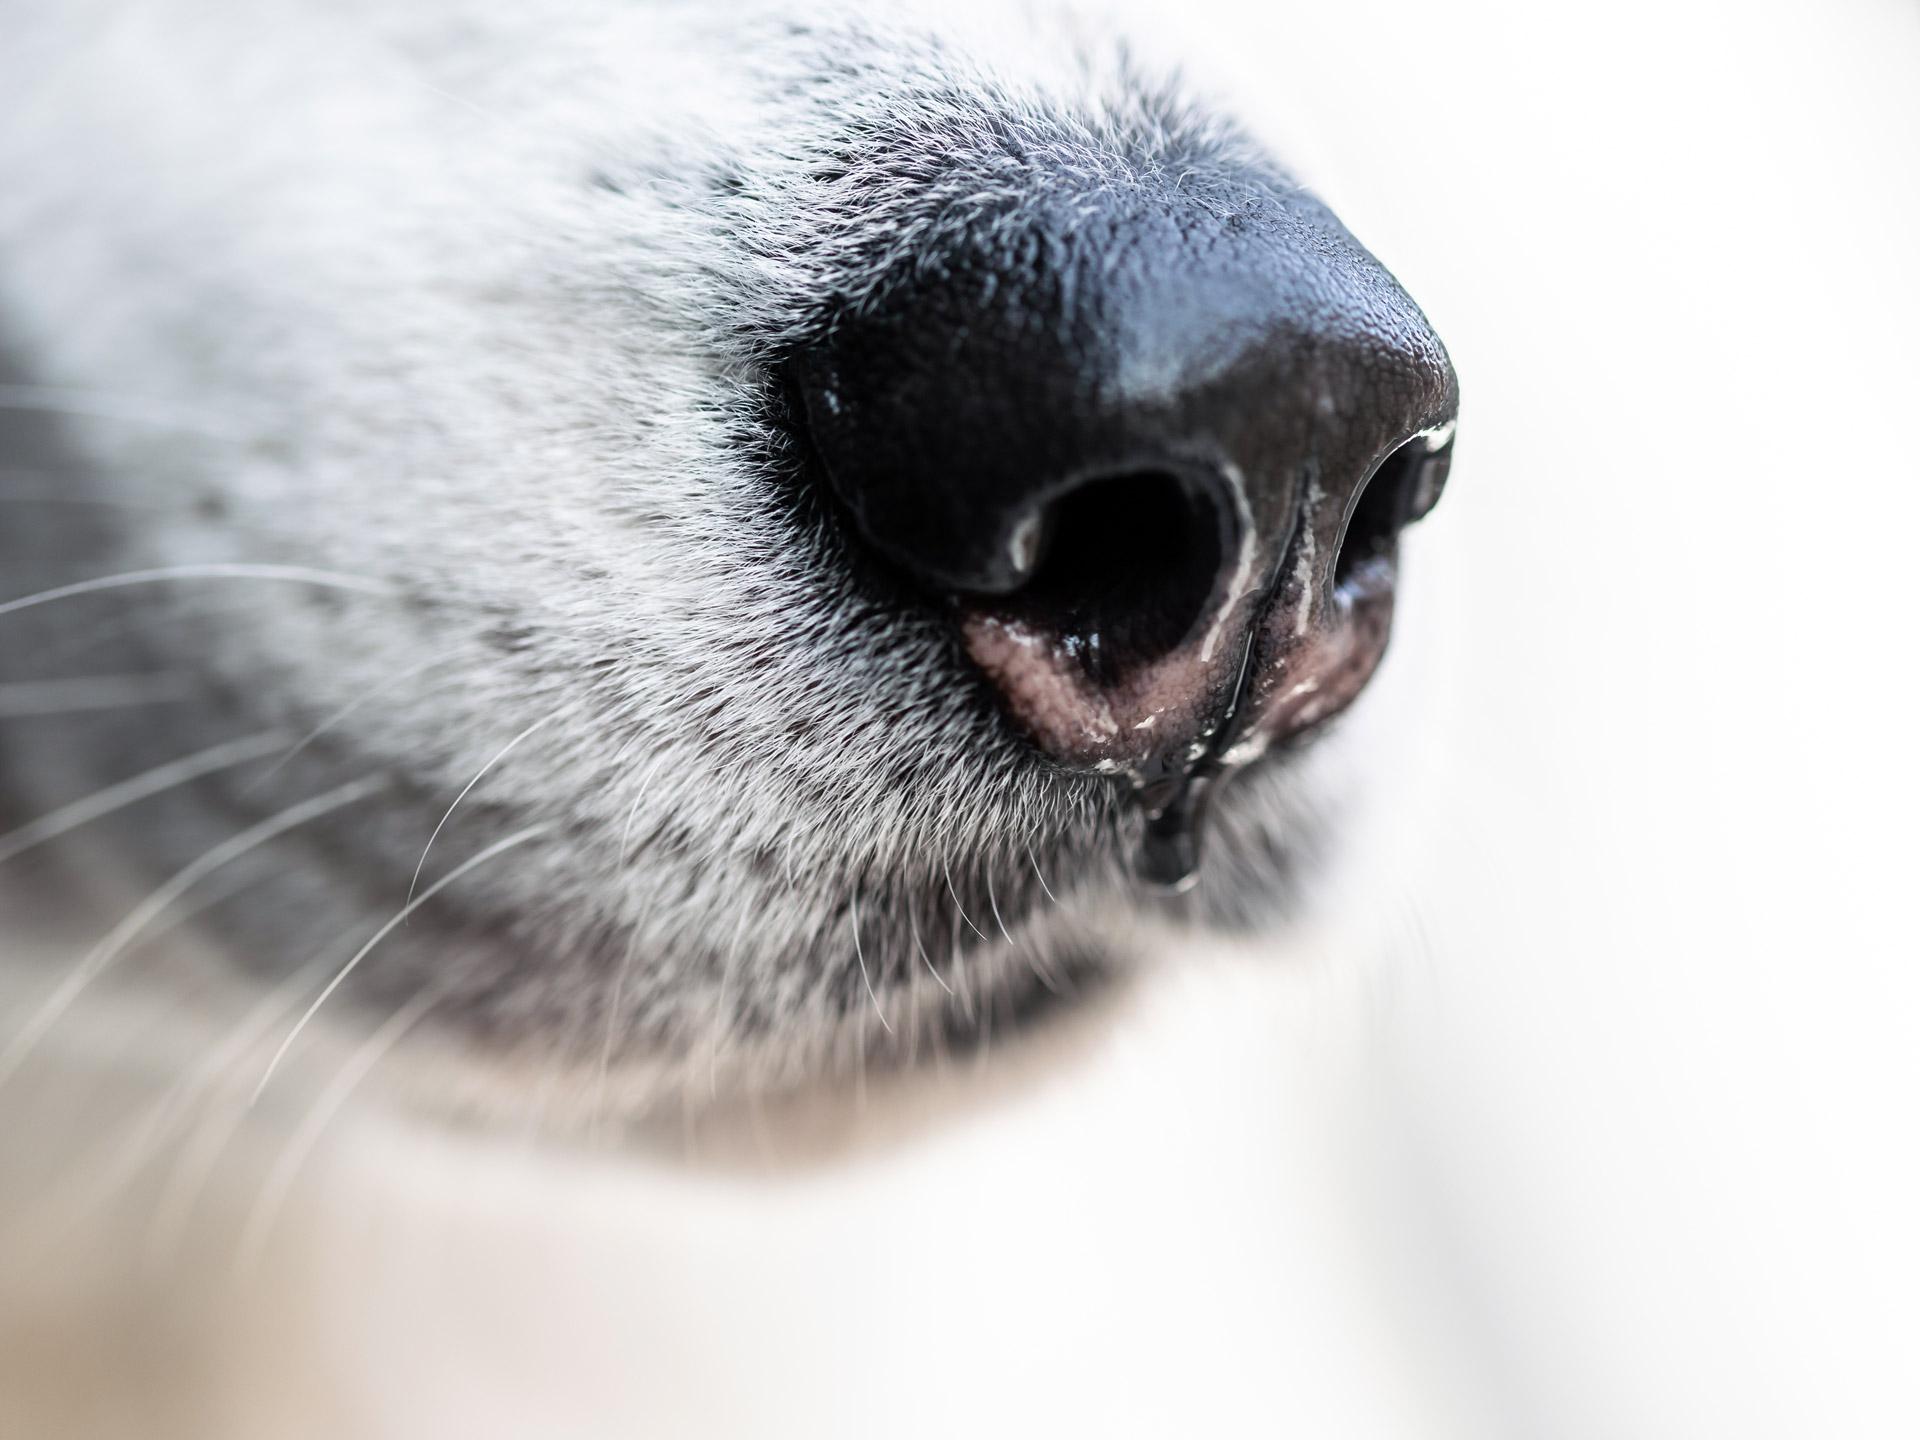 On average, dogs have about 220 million scent receptors. Shutterstock